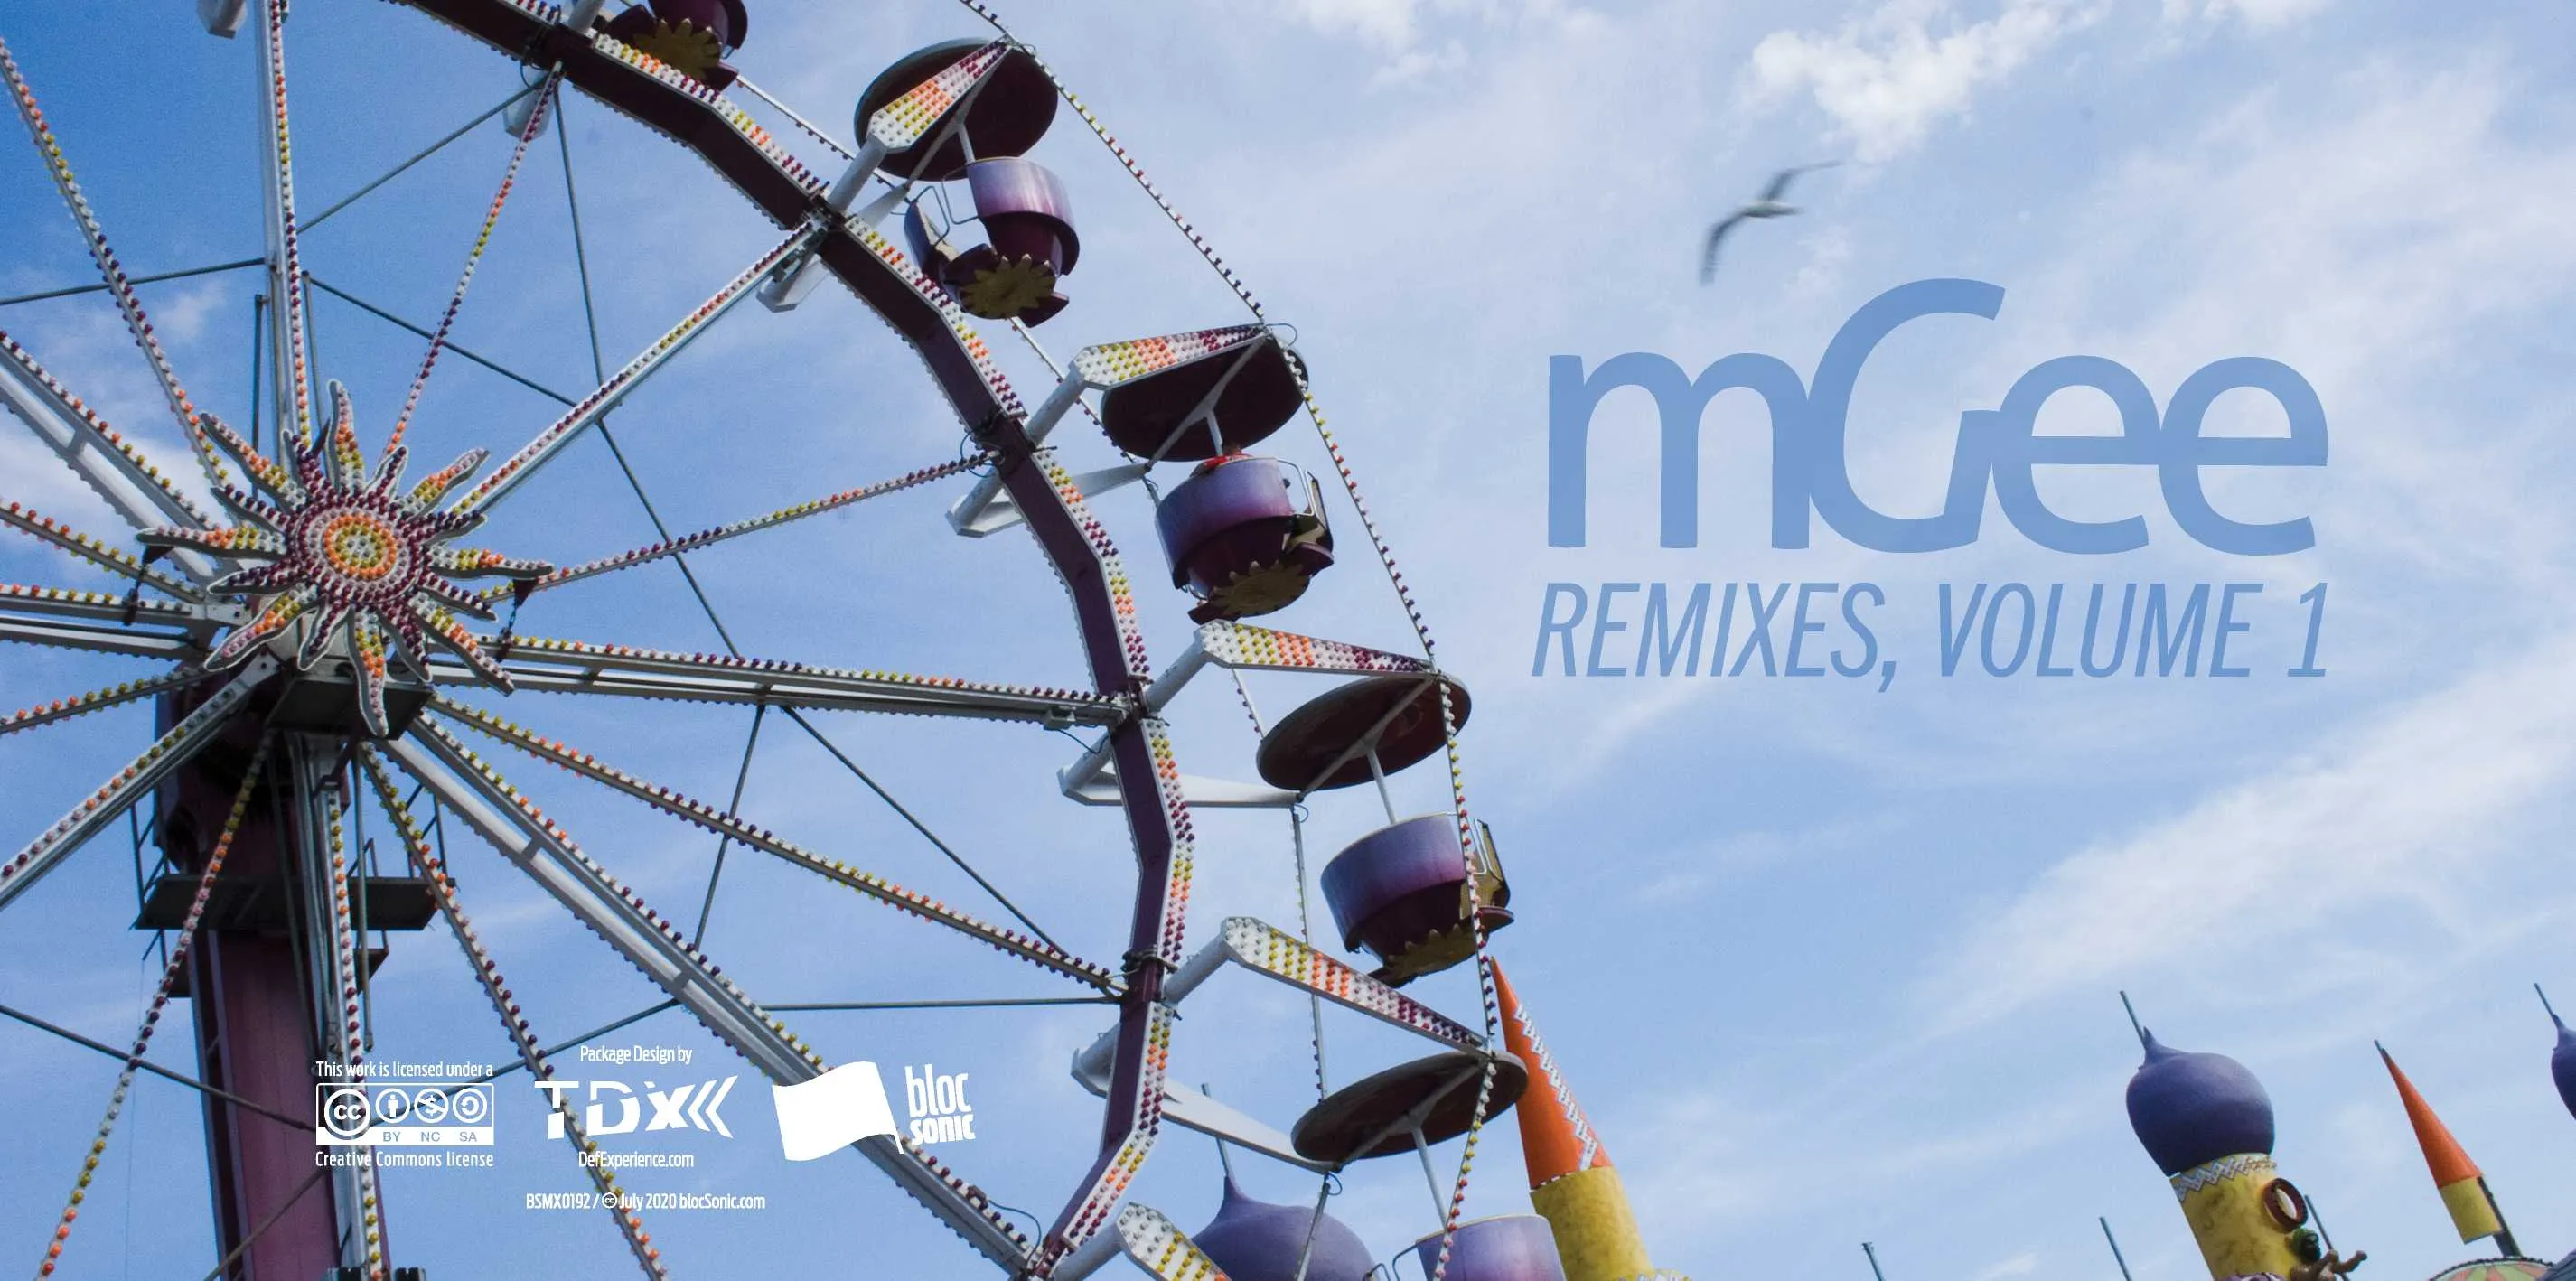 Album insert for “Remixes, Volume 1” by mGee